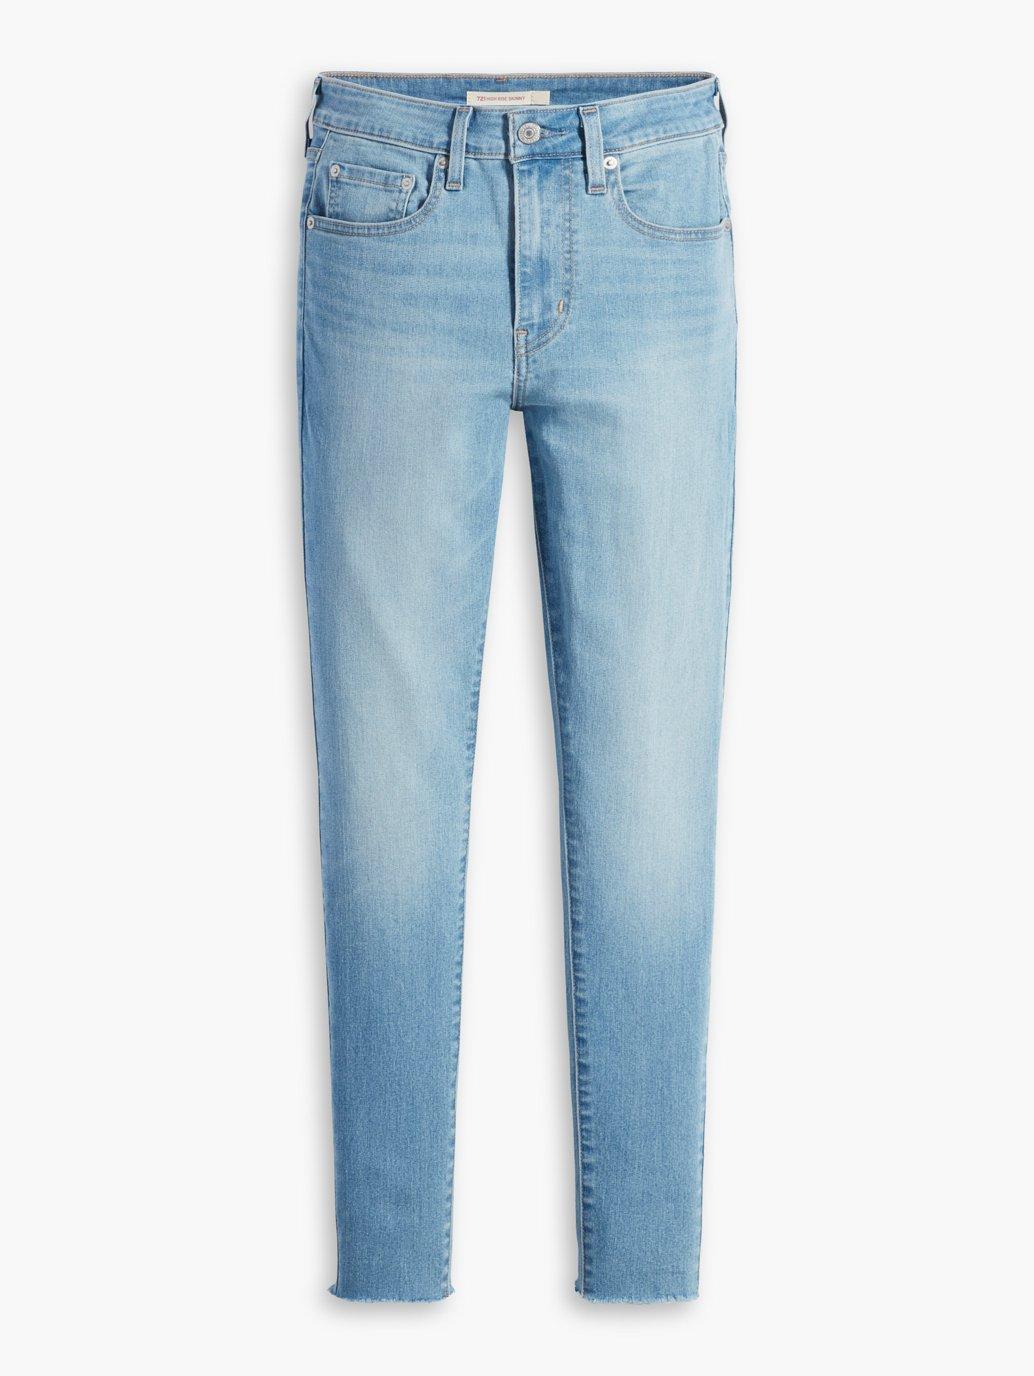 Buy Levi’s® Women's 721 High-Rise Skinny Jeans | Levi’s® Official ...